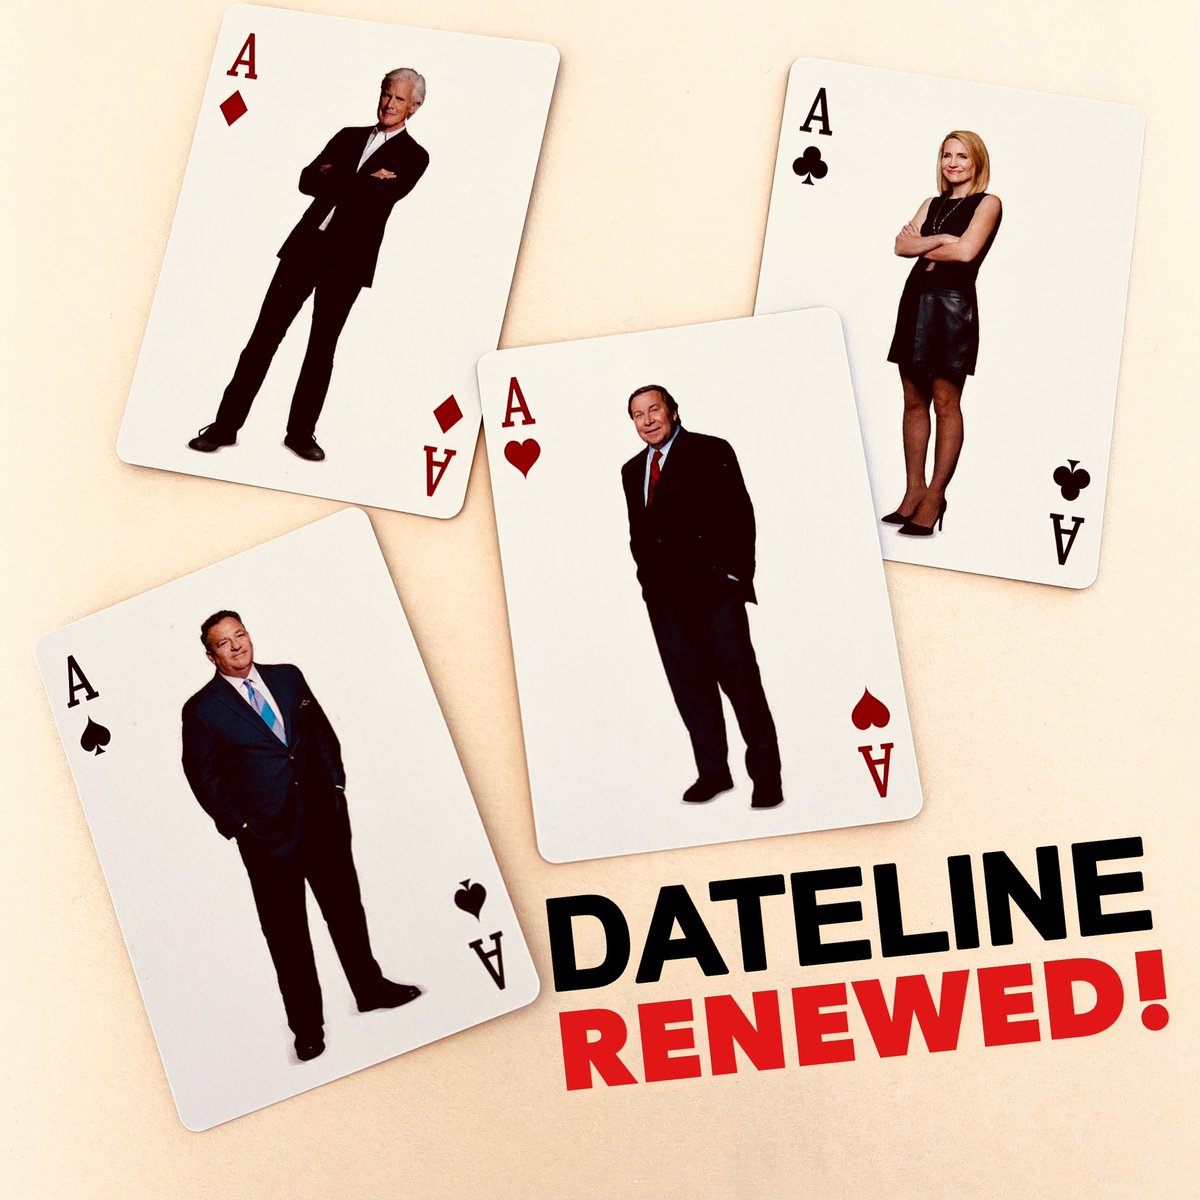 #Dateline has been renewed for another season!
Cheers to the aces of true crime and to the longest-running show in NBC prime-time history!!! (That’s us btw) ♠️❤️♦️♣️